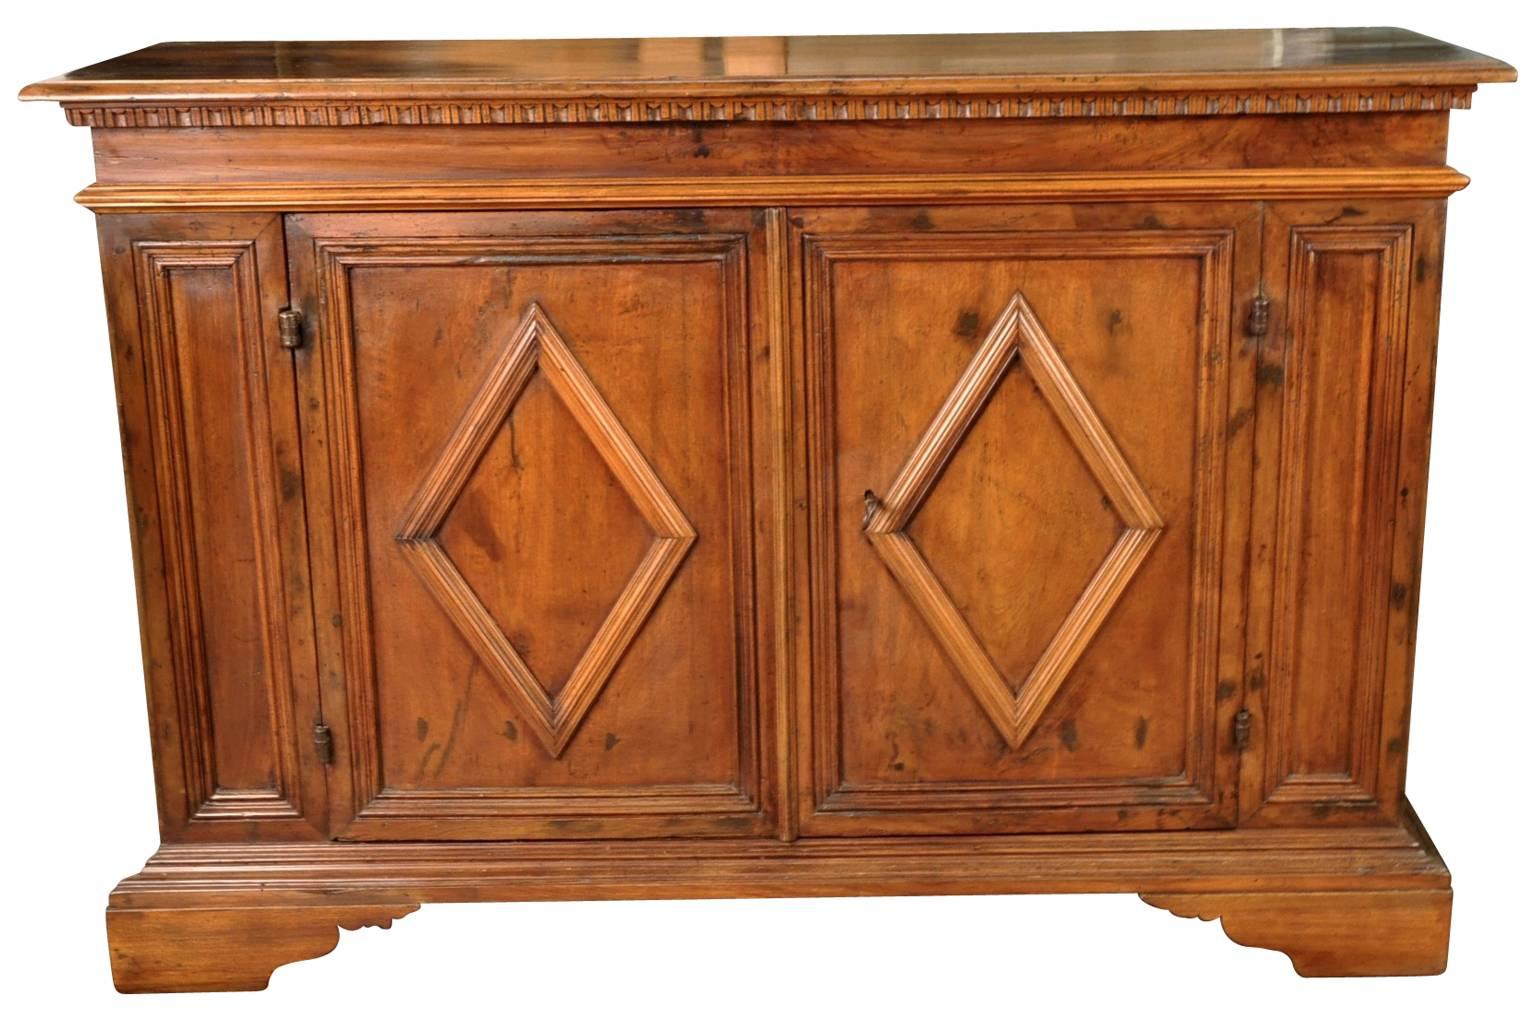 A very handsome early 19th century walnut Credenza from the Bologna region of Italy. Handsomely constructed with raised lozenge panel doors, dentilated detail and raised on bracket feet.